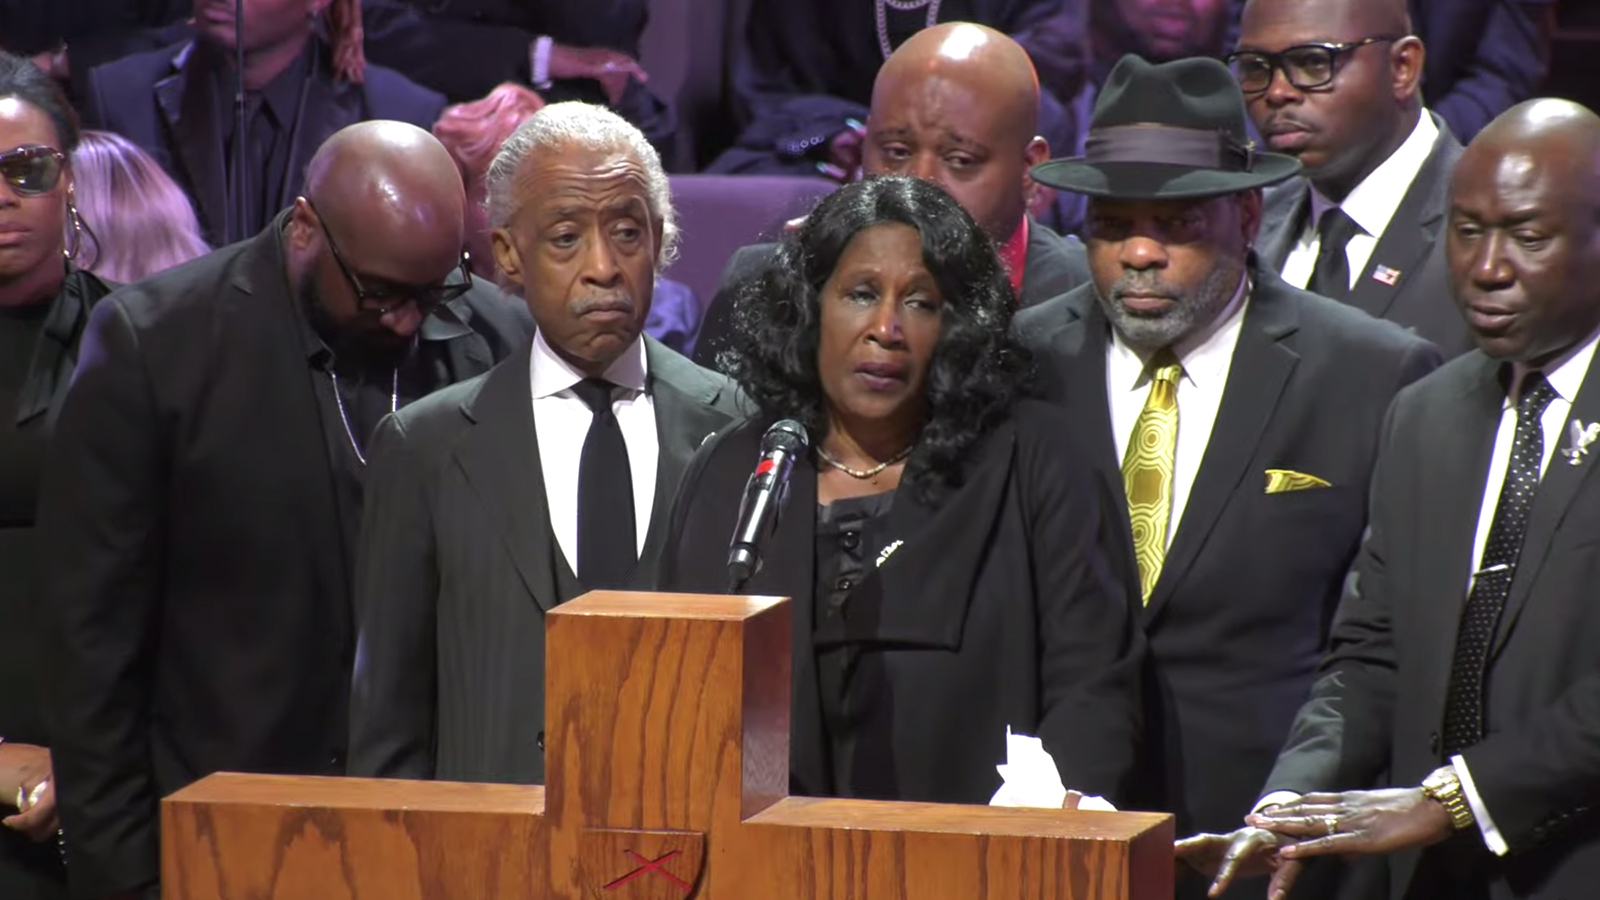 RowVaughn Wells, mother of Tyre Nichols, speaks during the funeral service for her son at Mississippi Boulevard Christian Church on Wed., Feb. 1, 2023, in Memphis, Tenn. Video screen grab